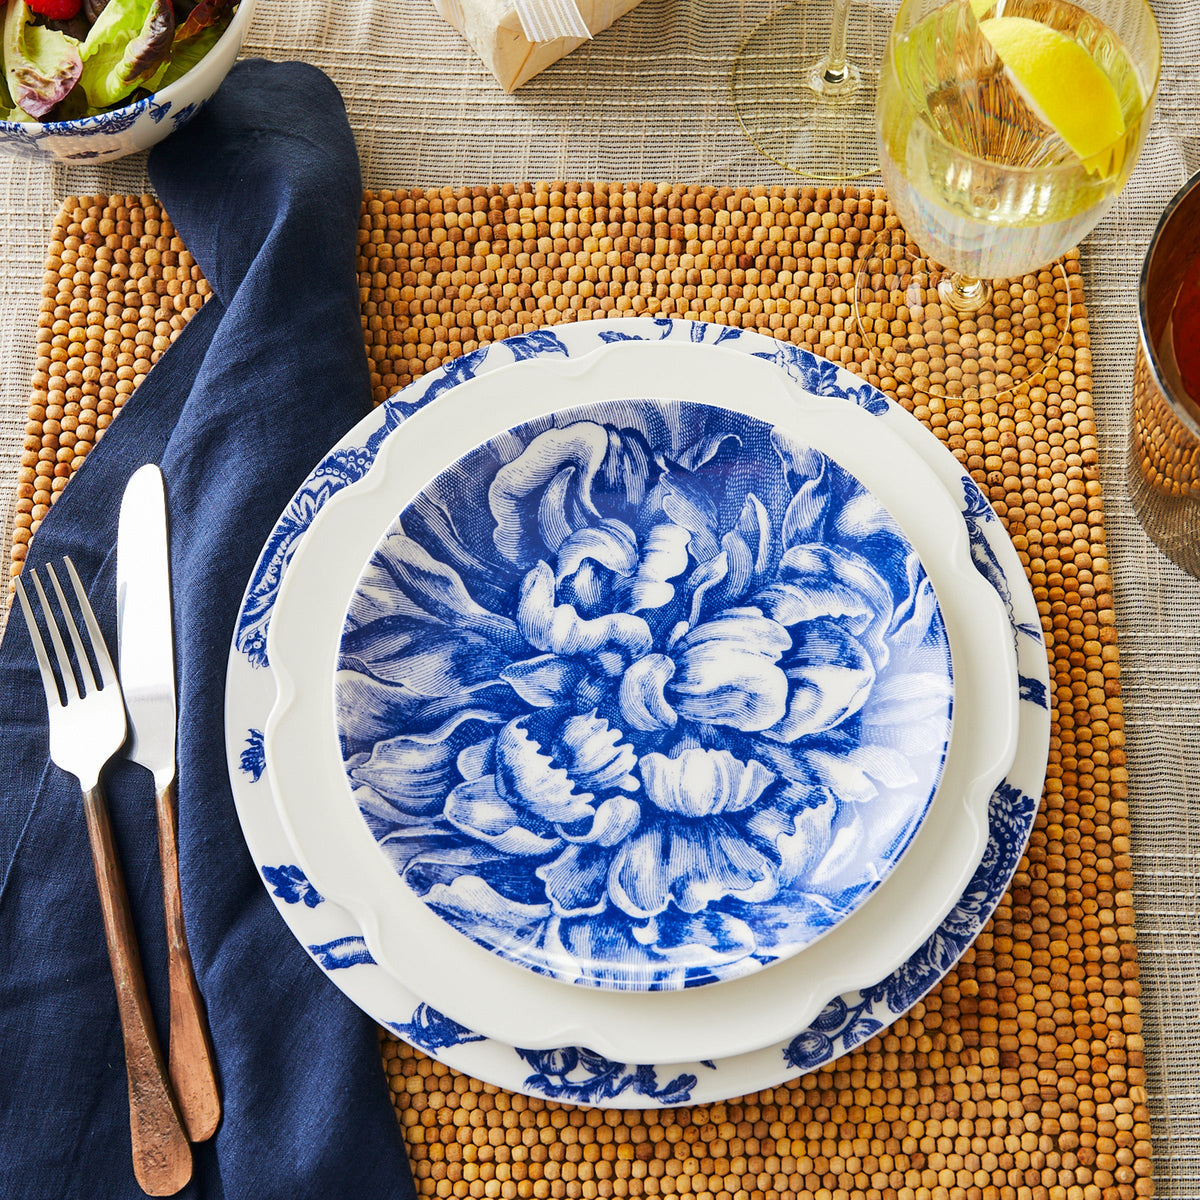 An ornate blue and white Peony Coupe Salad Plate set on a table mat, accompanied by silver utensils, a napkin, and glasses of wine and water.